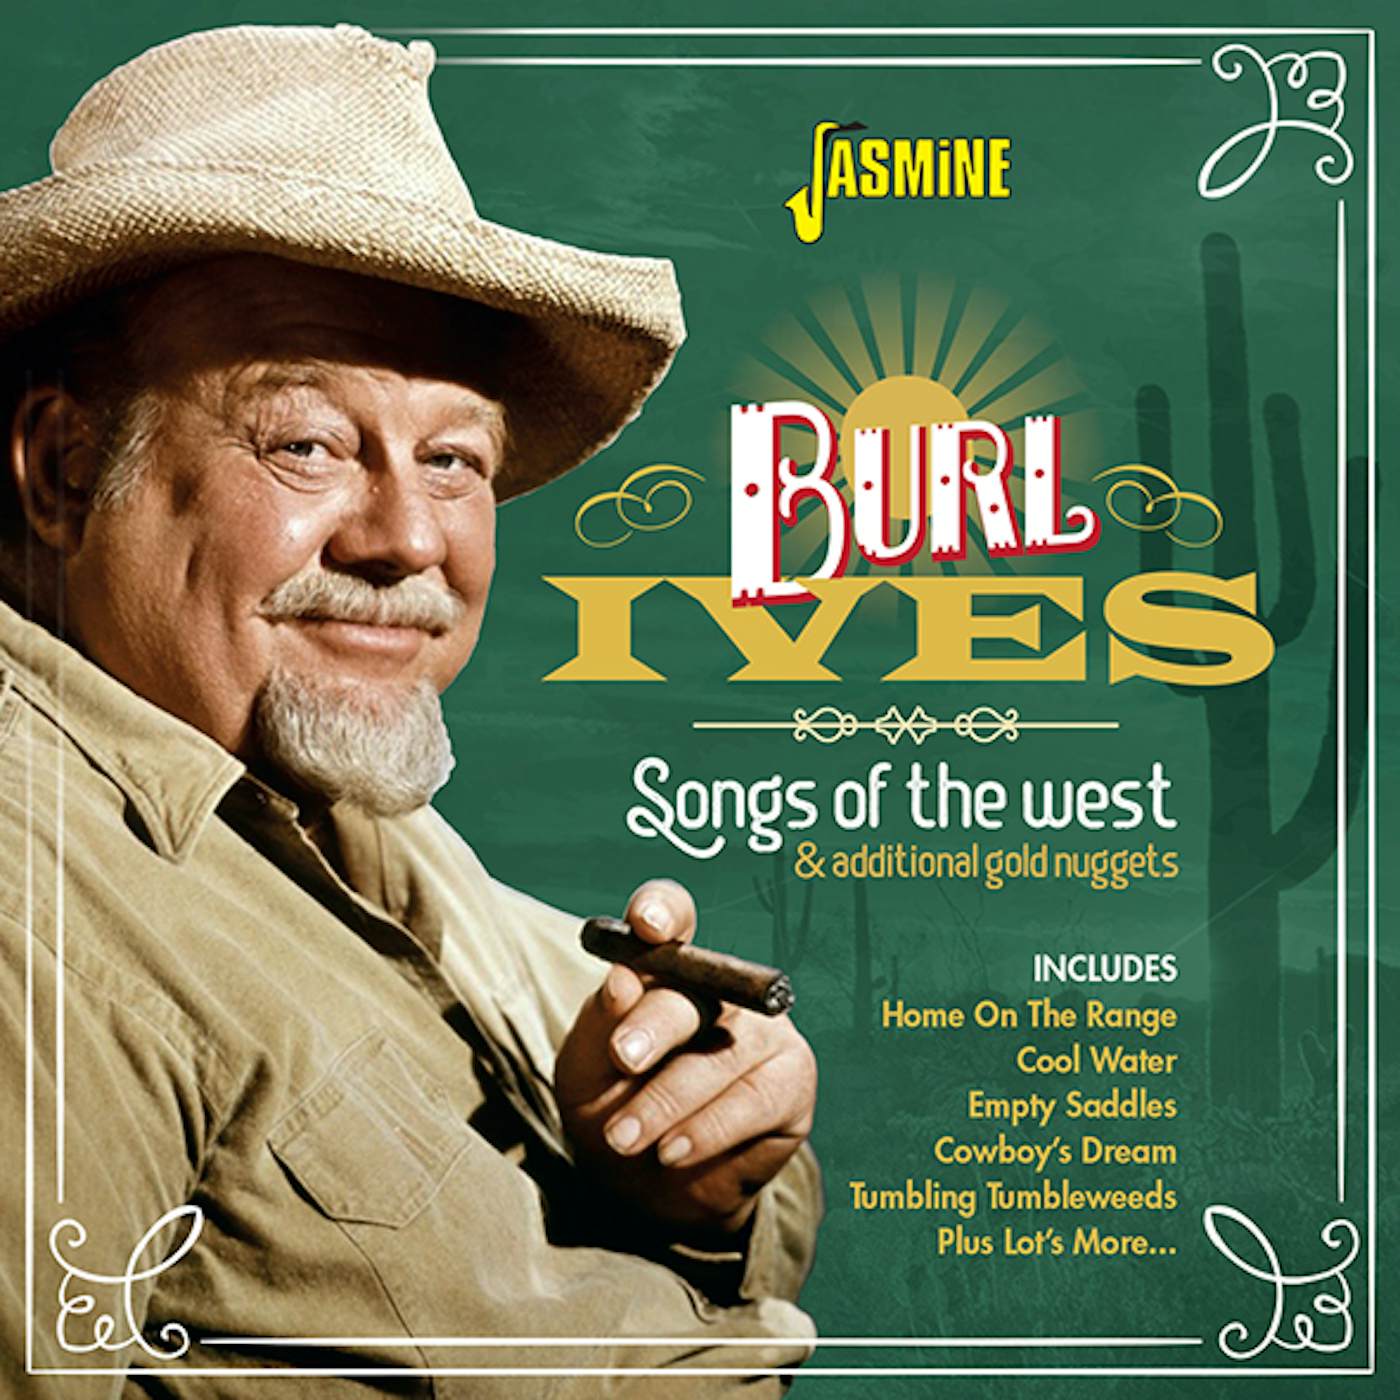 Burl Ives SONGS OF THE WEST & ADDITIONAL GOLD NUGGETS CD